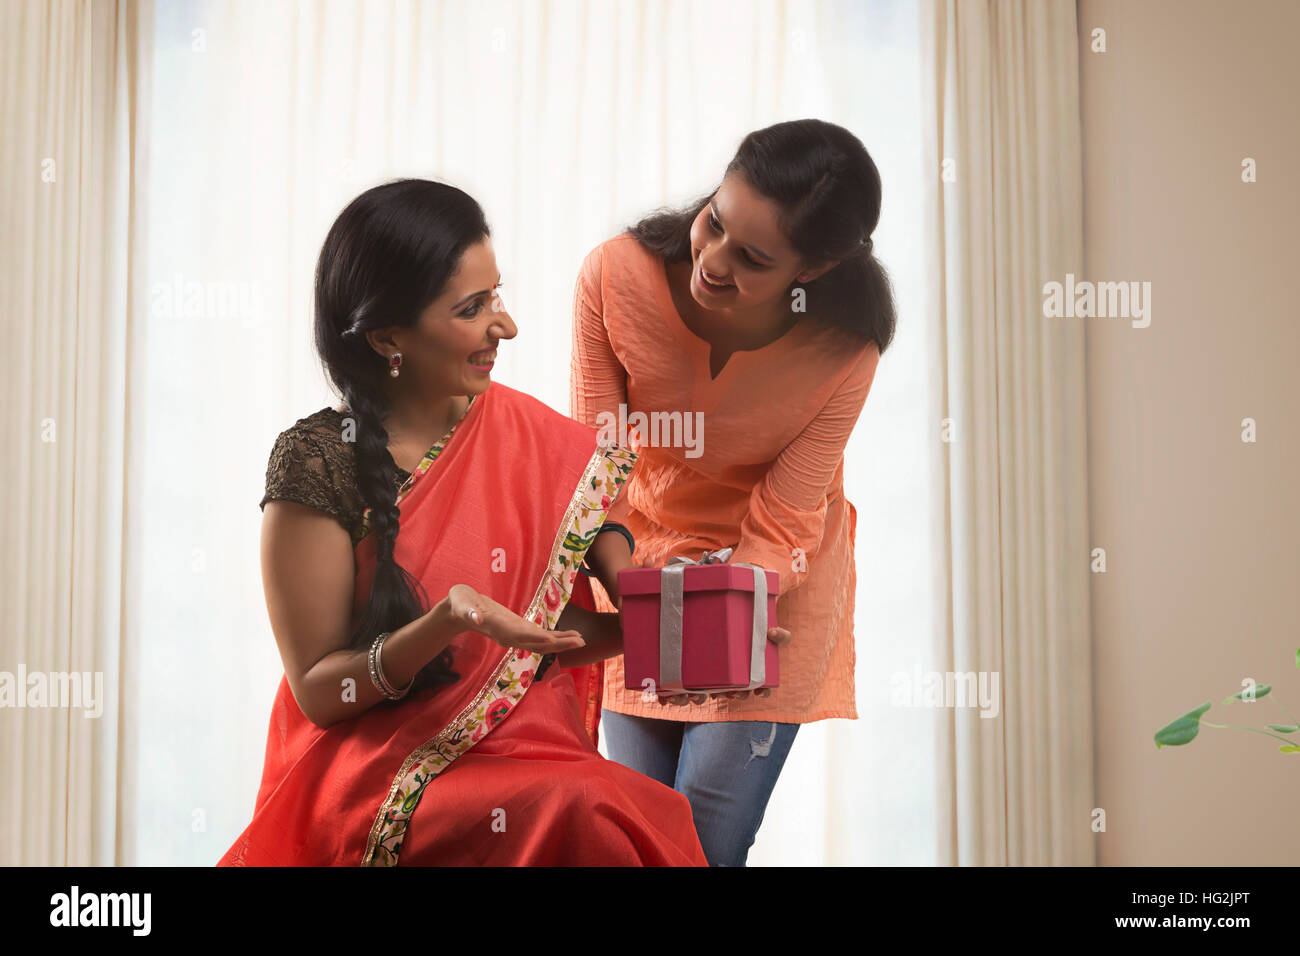 Daughter giving mother birthday gift Stock Photo